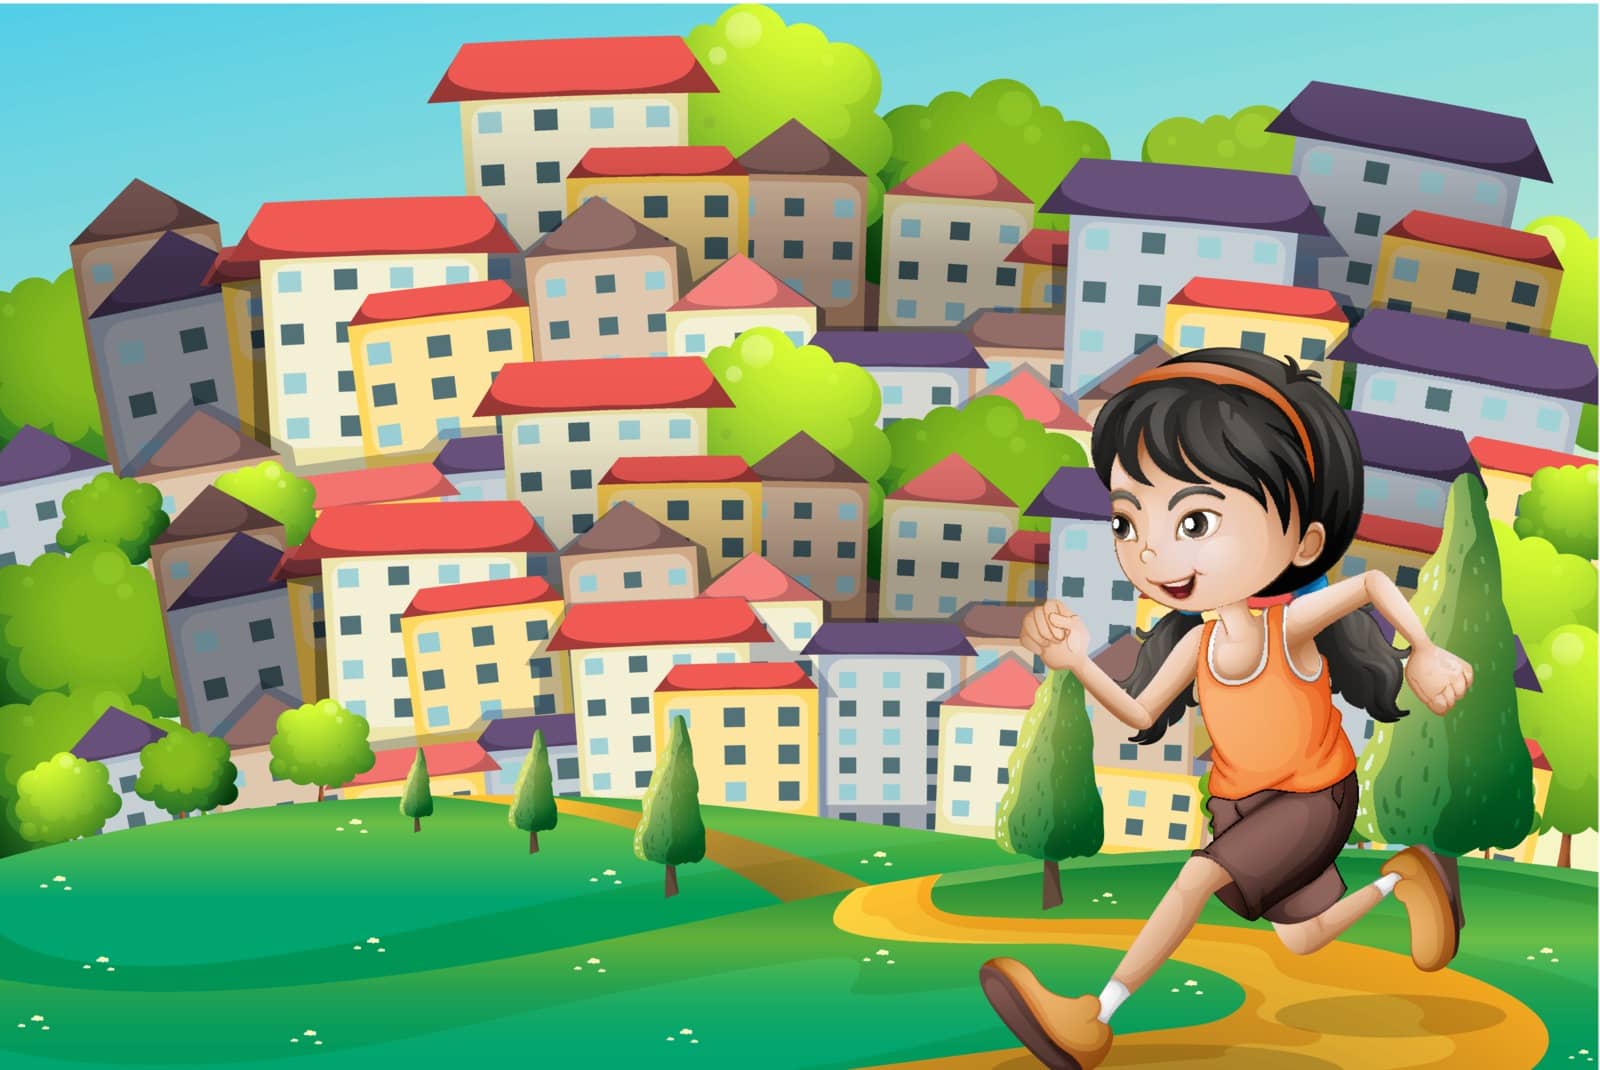 Illustration of a hilltop with a girl running across the buildings